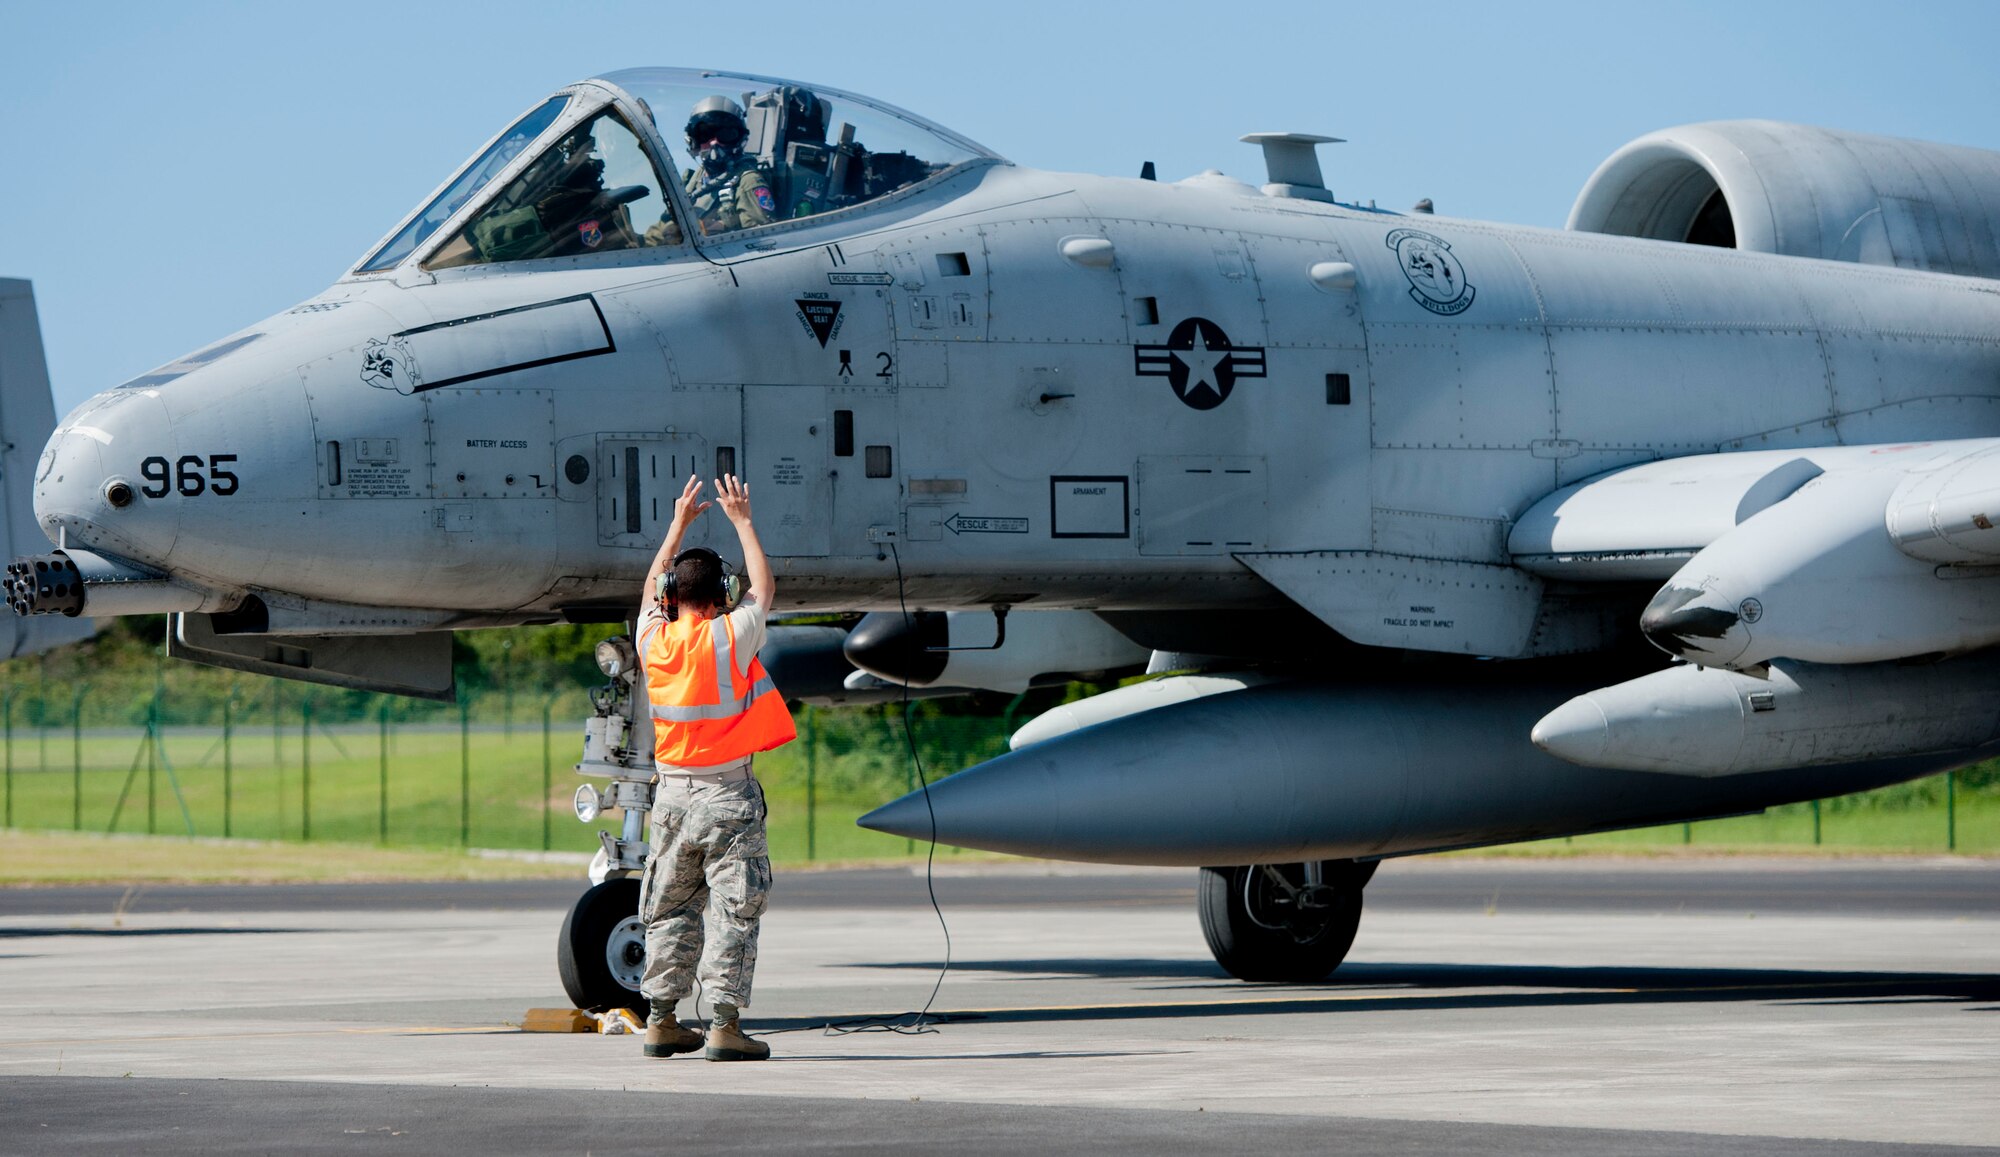 Staff Sgt. Chris Zamora, a 65th Operations Support Squadron transient alert maintenance technician, marshalls in 1st Lt. Josh Woodard, a 354th Expeditionary Fighter Squadron A-10 Thunderbolt II pilot, on Lajes Field, Azores, Portugal, August 1, 2015. The 354th Expeditionary Fighter Squadron returns home after deploying 12 A-10s as part of a Theater Security Package in support of Operation Atlantic Resolve, to Spangdahlem AB, Germany where they conducted training alongside our NATO allies to strengthen interoperability and to demonstrate U.S. commitment to the security and stability of Europe. (U.S. Air Force photo by Master Sgt. Bradley C. Church).